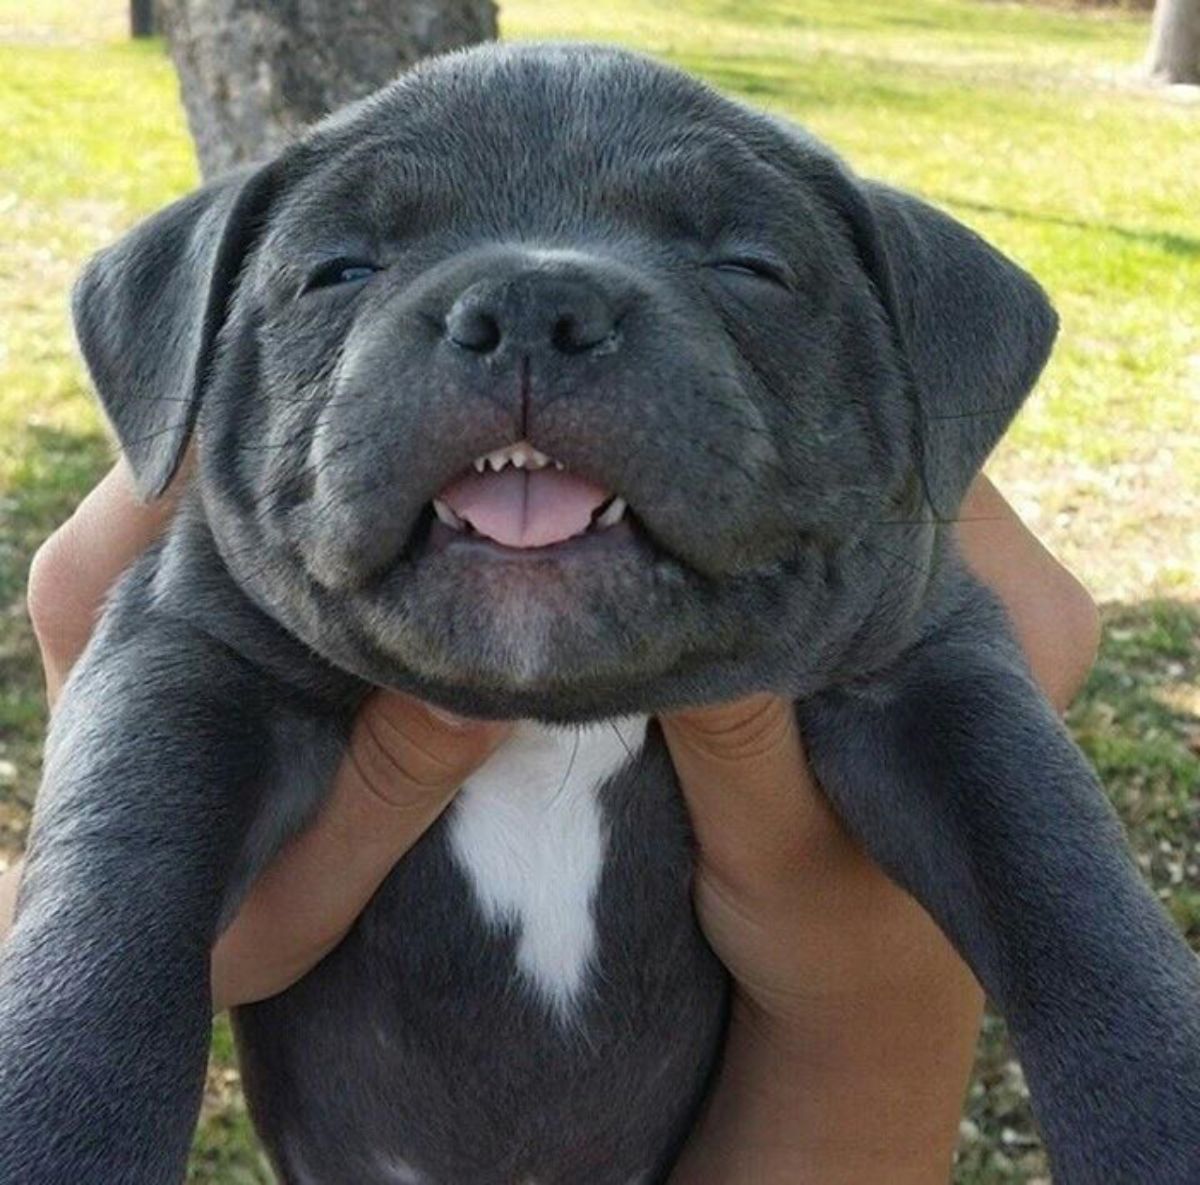 grey and white puppy being held up and the puppy's tiny teeth and tongue showing